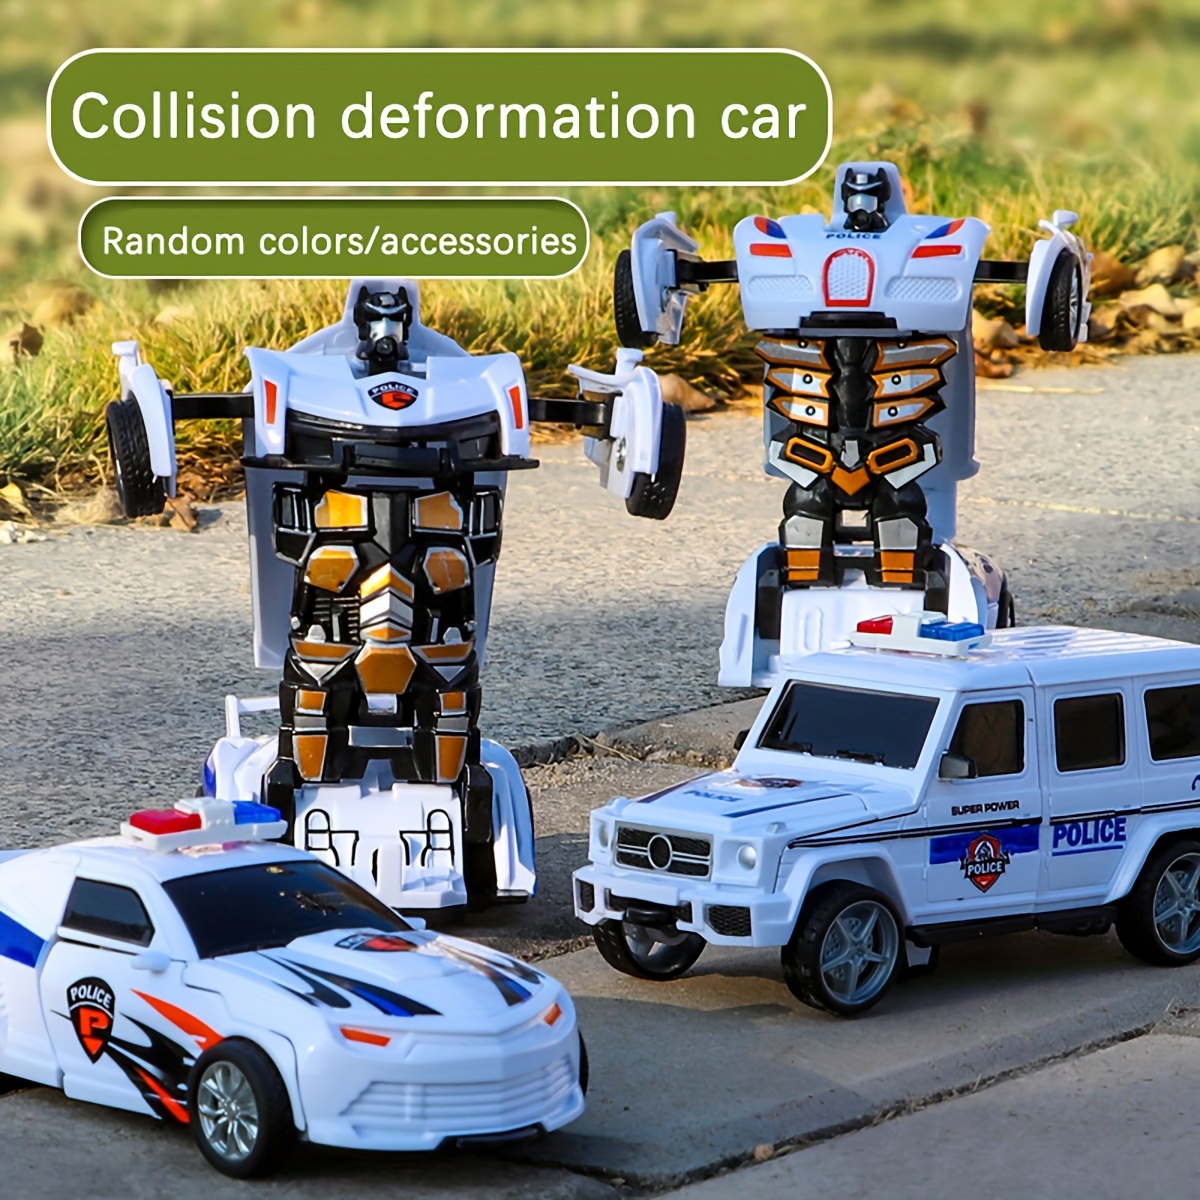 

1pc, Transforming Police Car Robot Toy, Plastic Toy, One-click Collision Deformation, Creative Birthday Gift, Home Decor Accessory